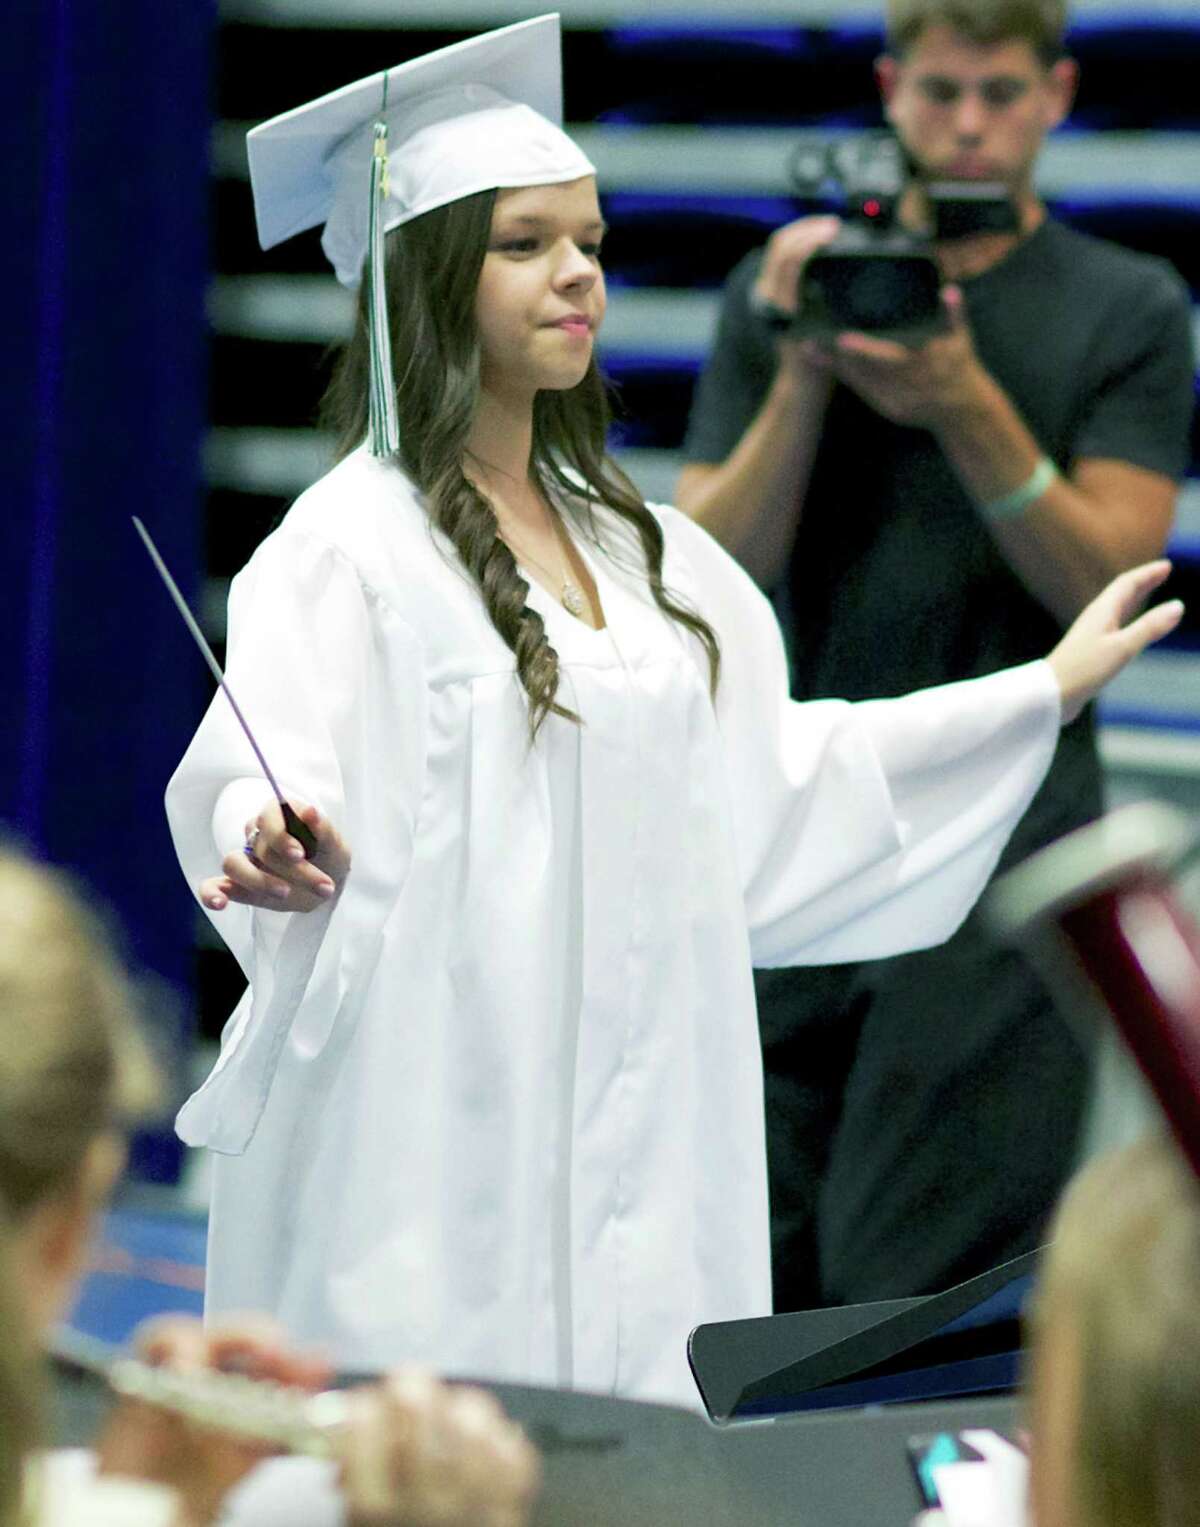 Graduate Katie Schaffer leads the NMHS orchestra in the Star Spangled Banner during New Milford High School's June 21 commencement ceremony for the Class of 2014 at the O'Neill Center on the westside campus of Western Connecticut State University in Danbury.